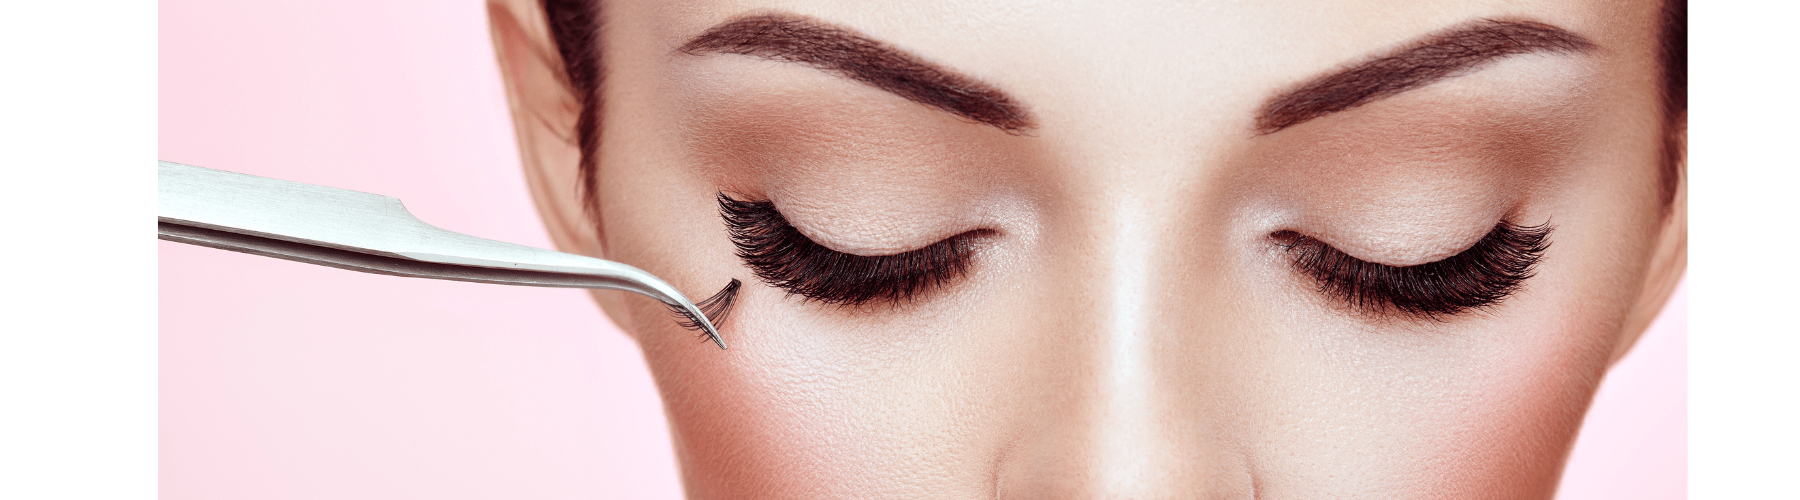 The Difference Between Eyelash Extensions & Lash Lifts - HUR BEAUTY